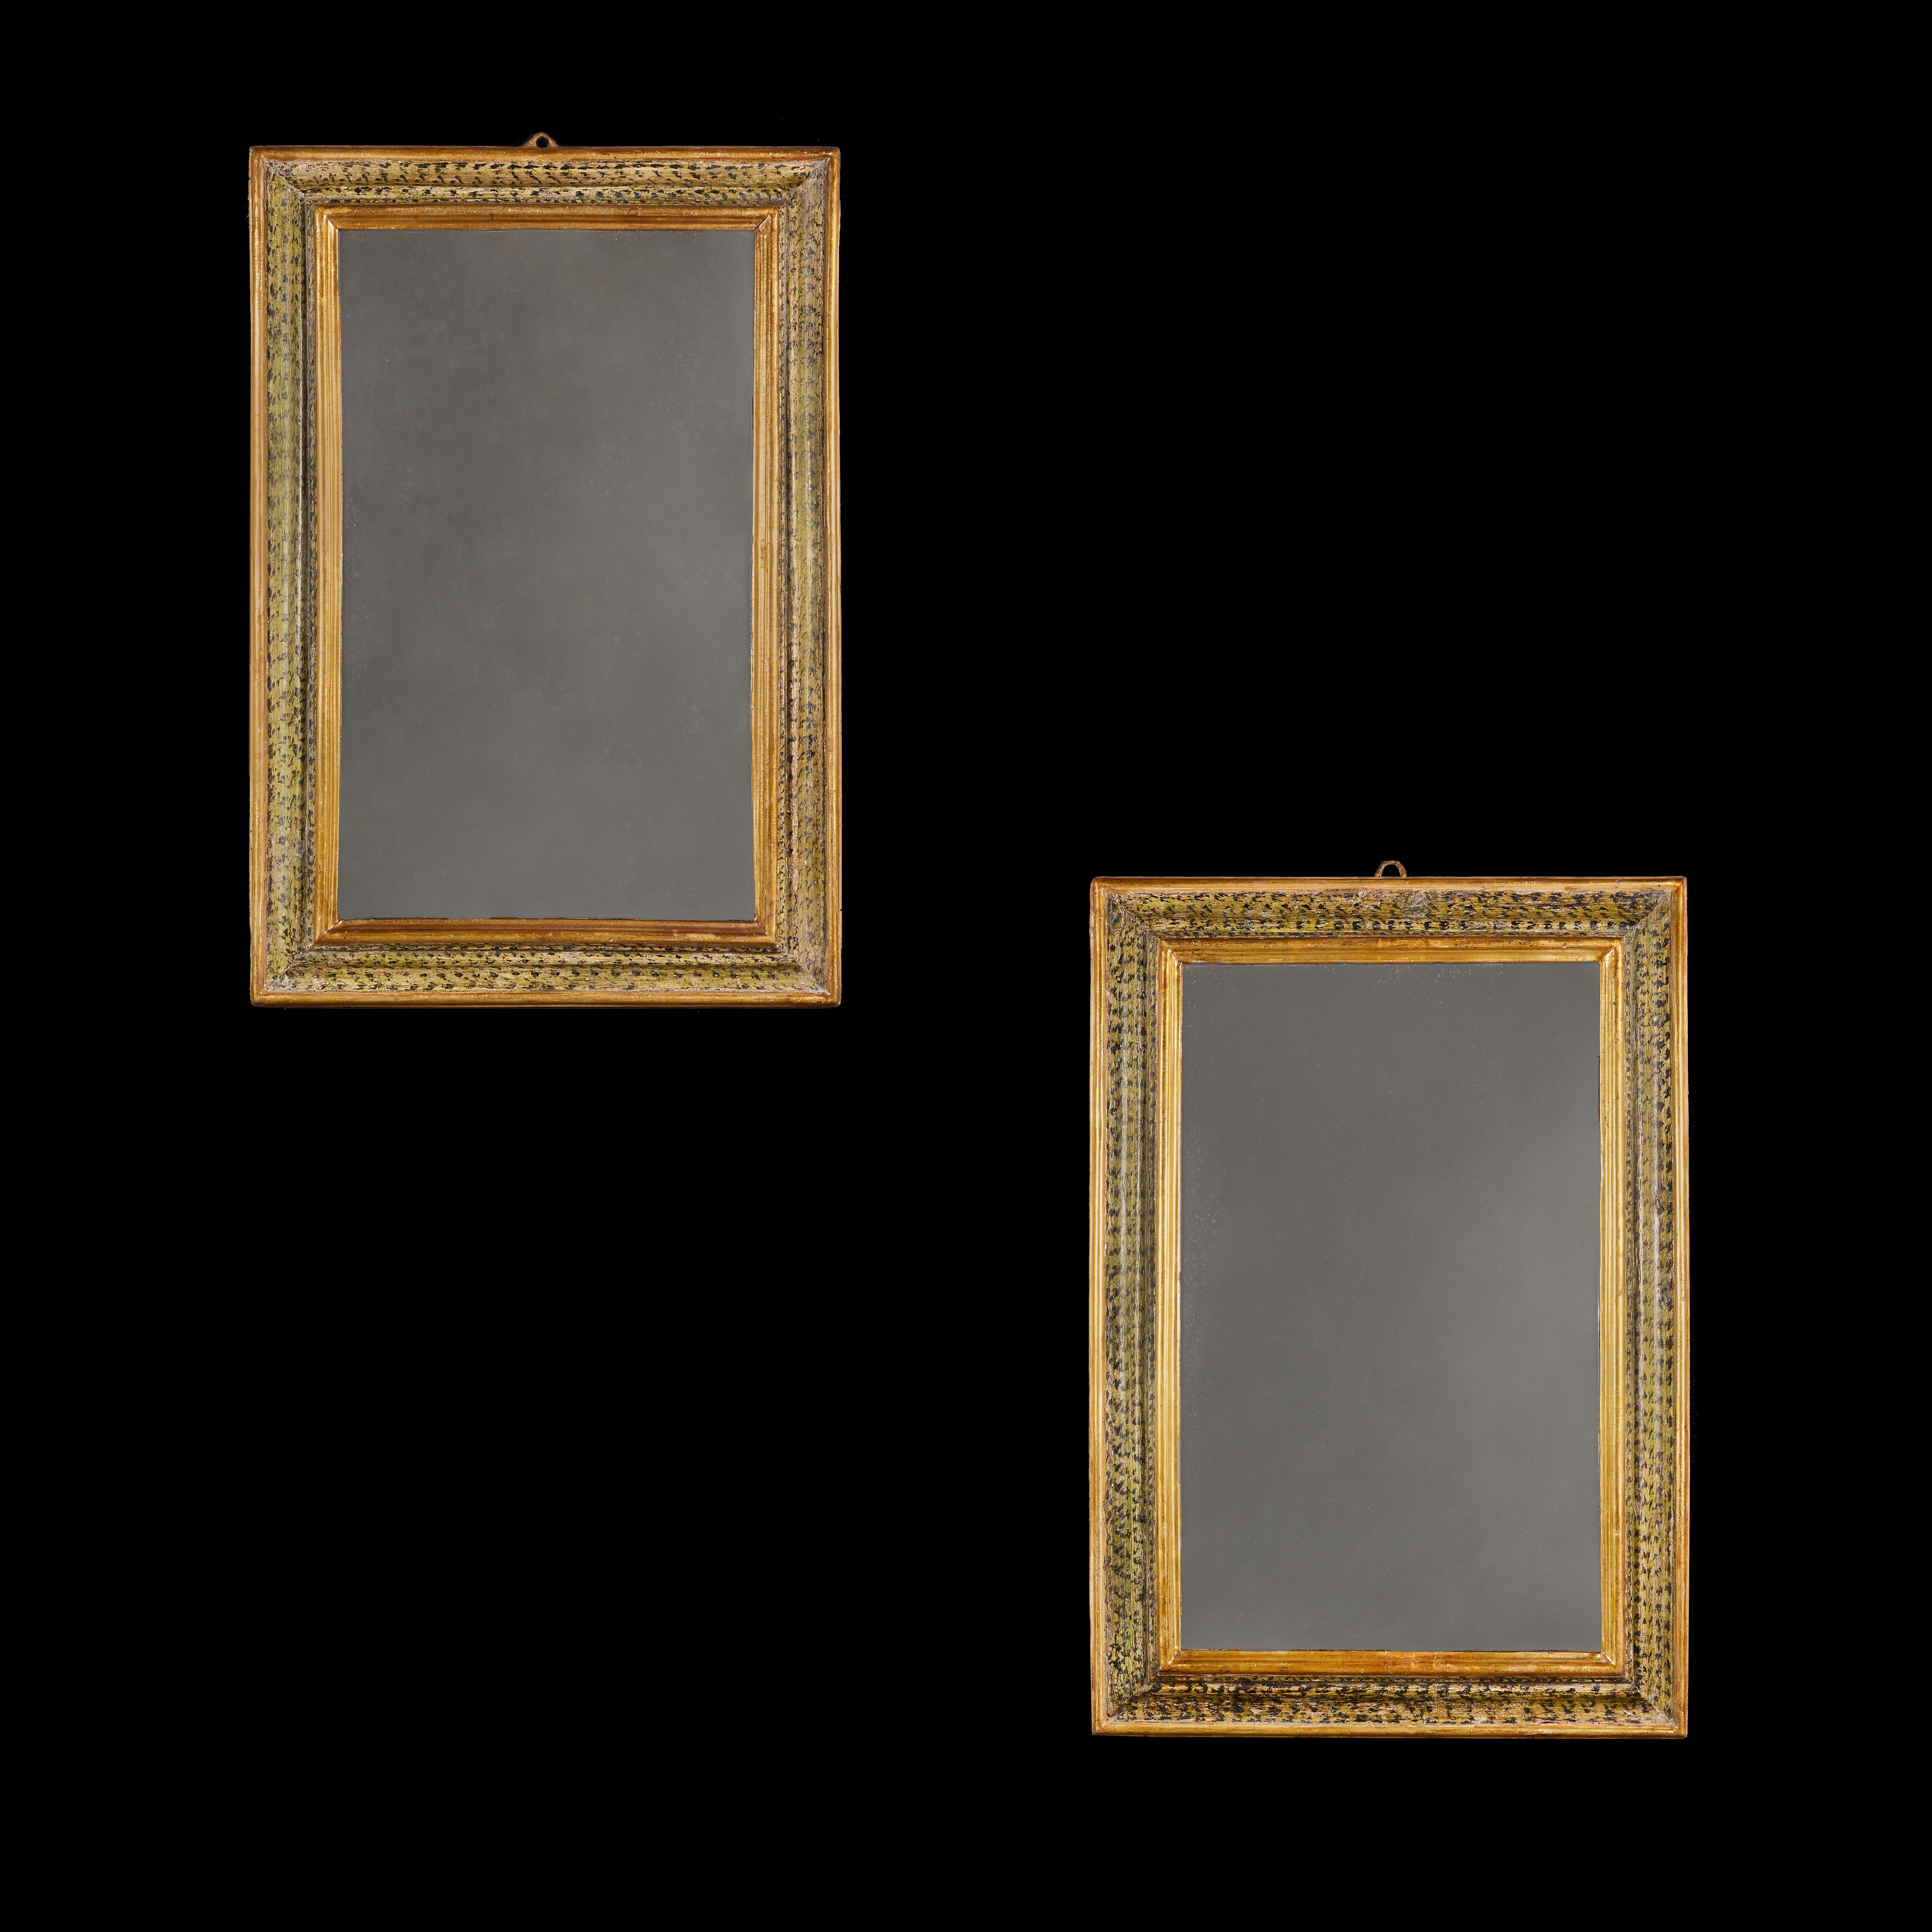 Italy, probably Piedmont, circa 1780

A pair of late 18th century North Italian mirrors with painted frames, the variegated green paintwork with giltwood borders.

Height 94.00cm
Width 64.00cm